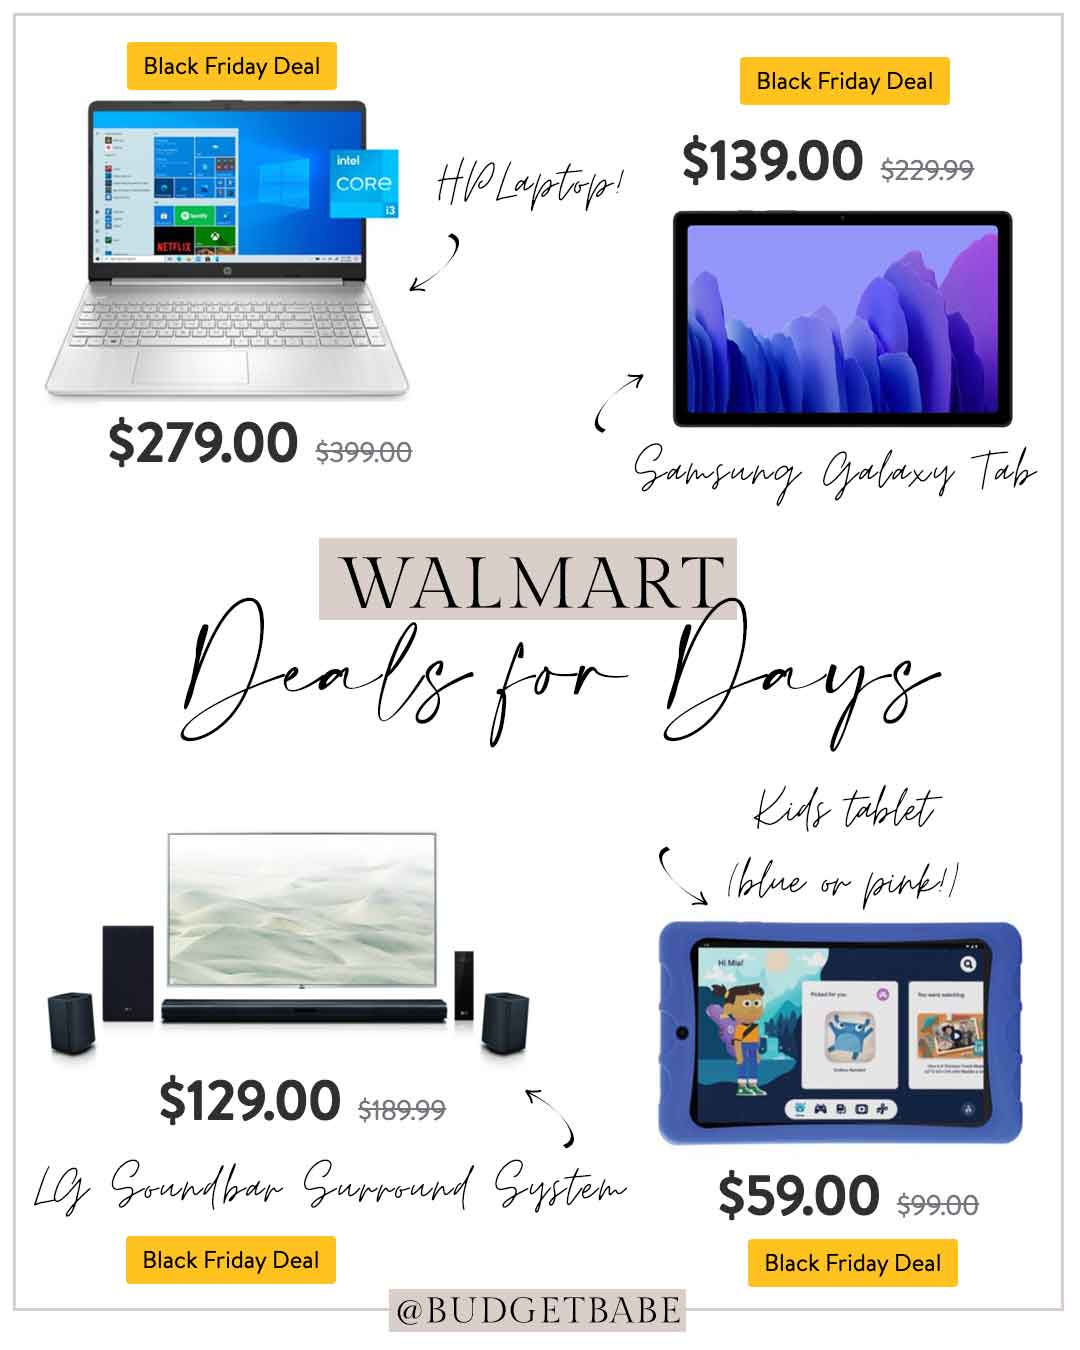 Walmart Deals for Days - early Black Friday deals starts today!